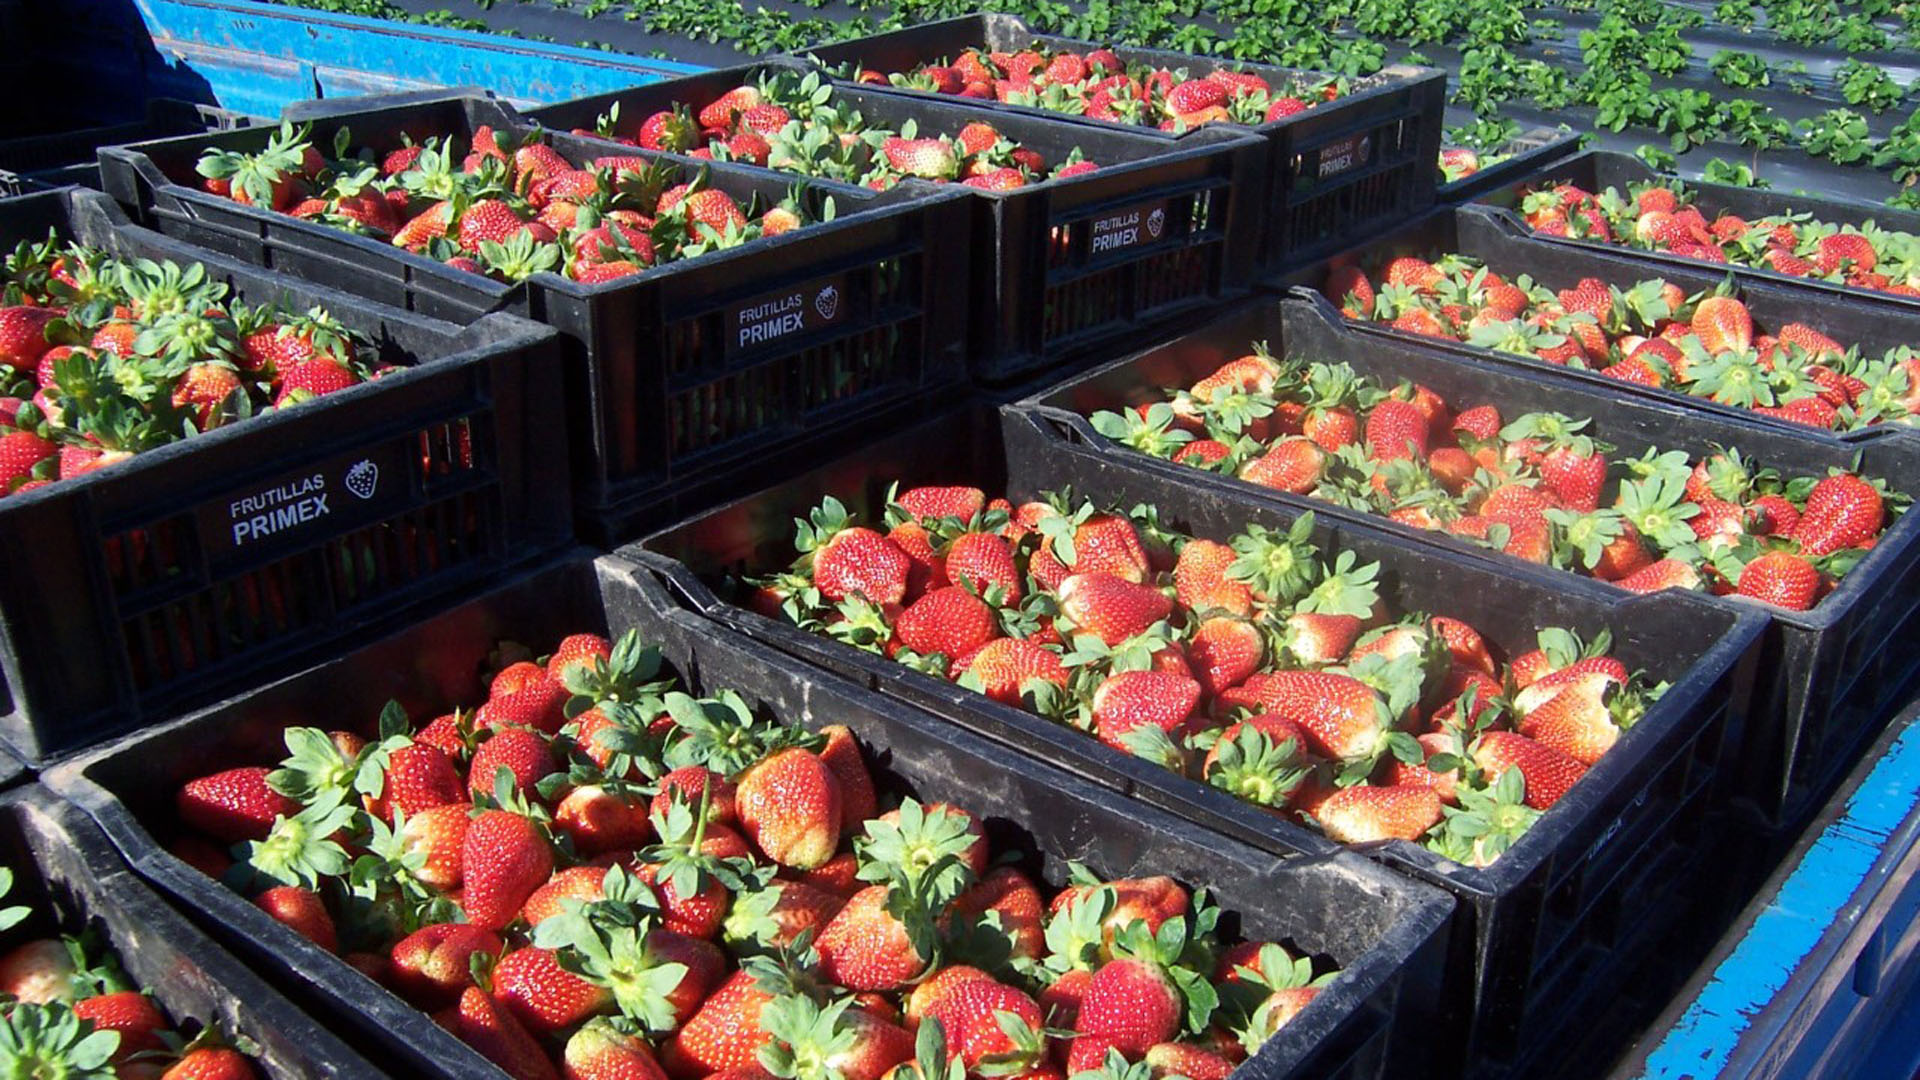 Picking strawberries is one of the many temporary farm jobs to work in New Zealand